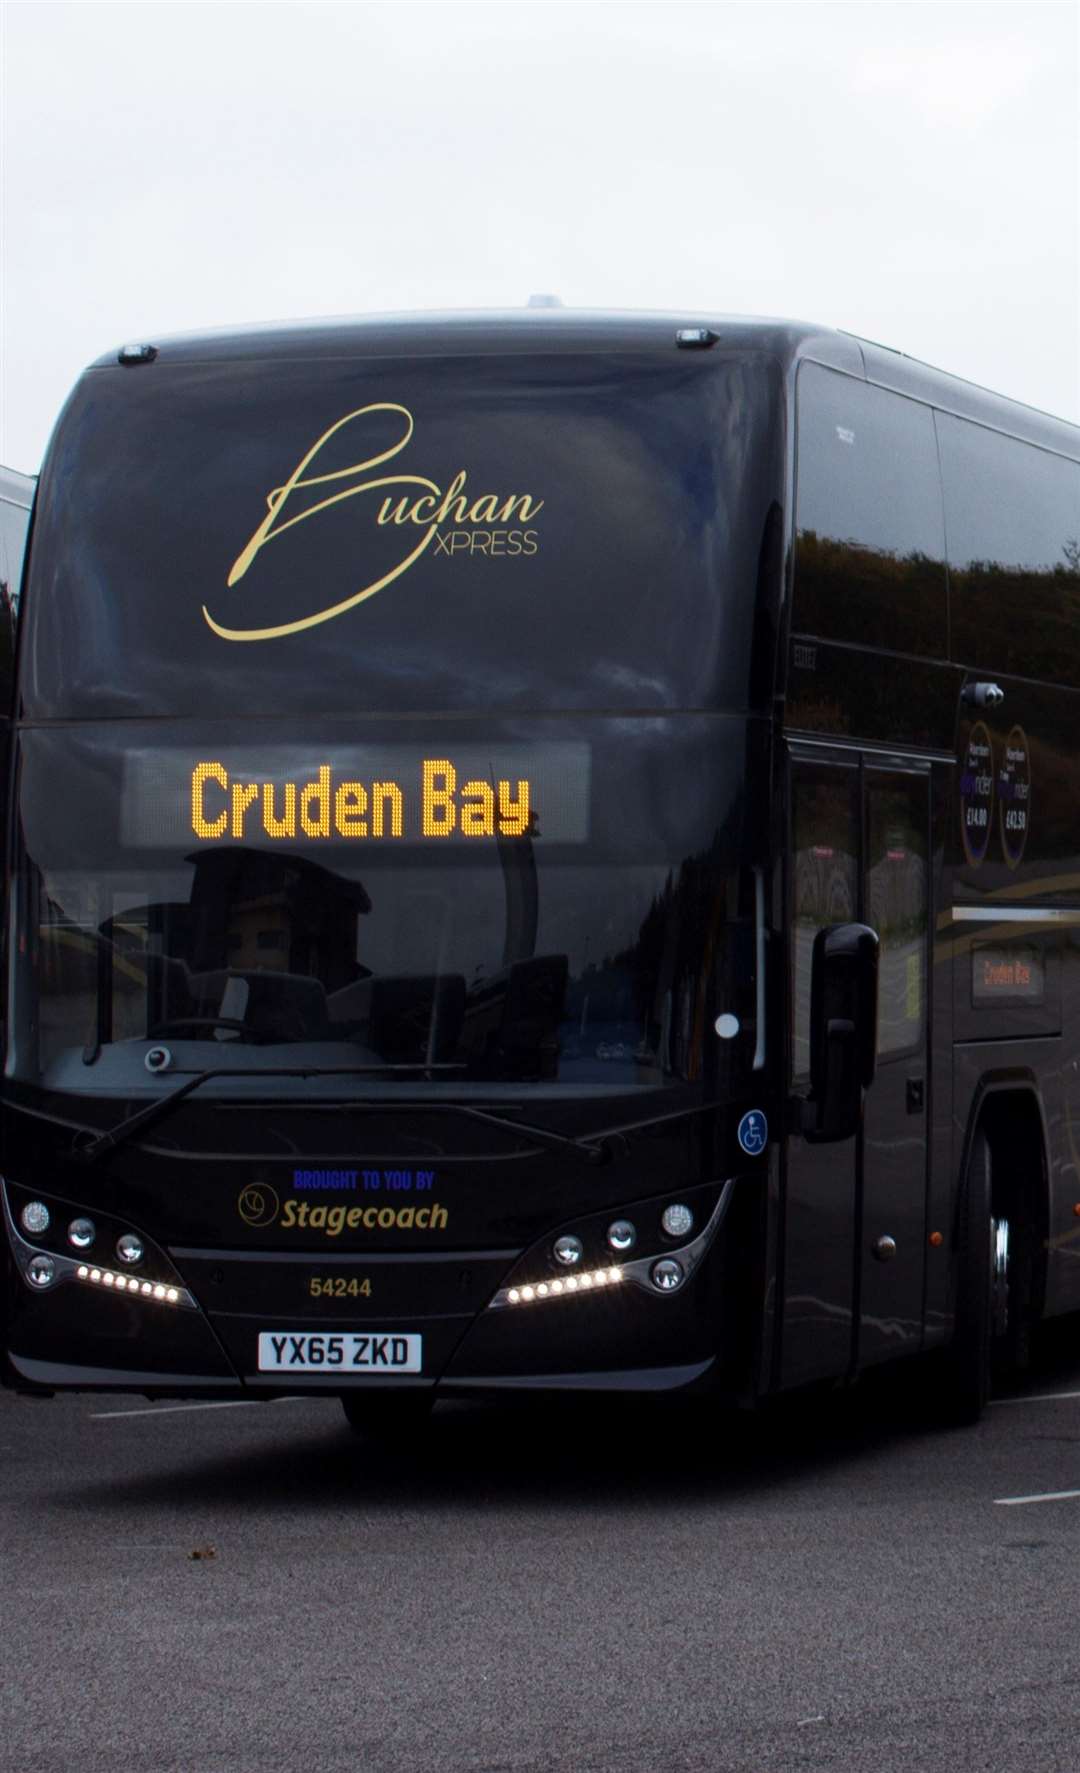 Councillor Stephen Smith called for services between Cruden Bay and Peterhead to be reinstated.